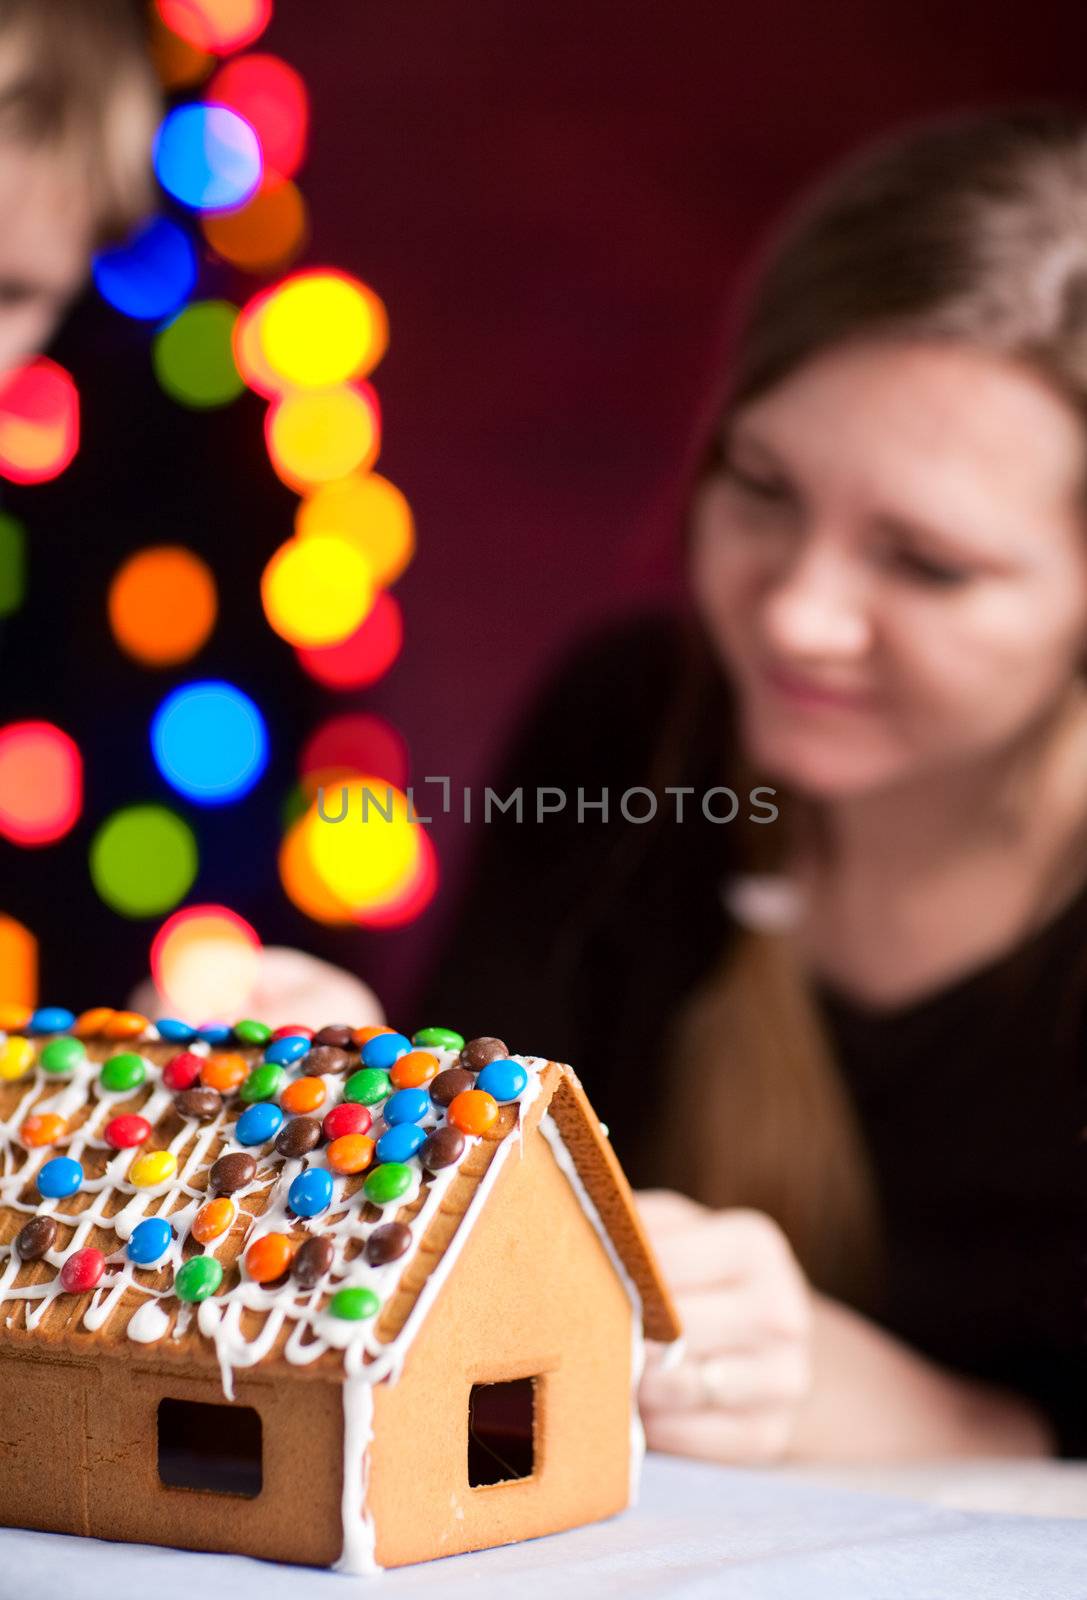 Gingerbread house decoration by shalamov